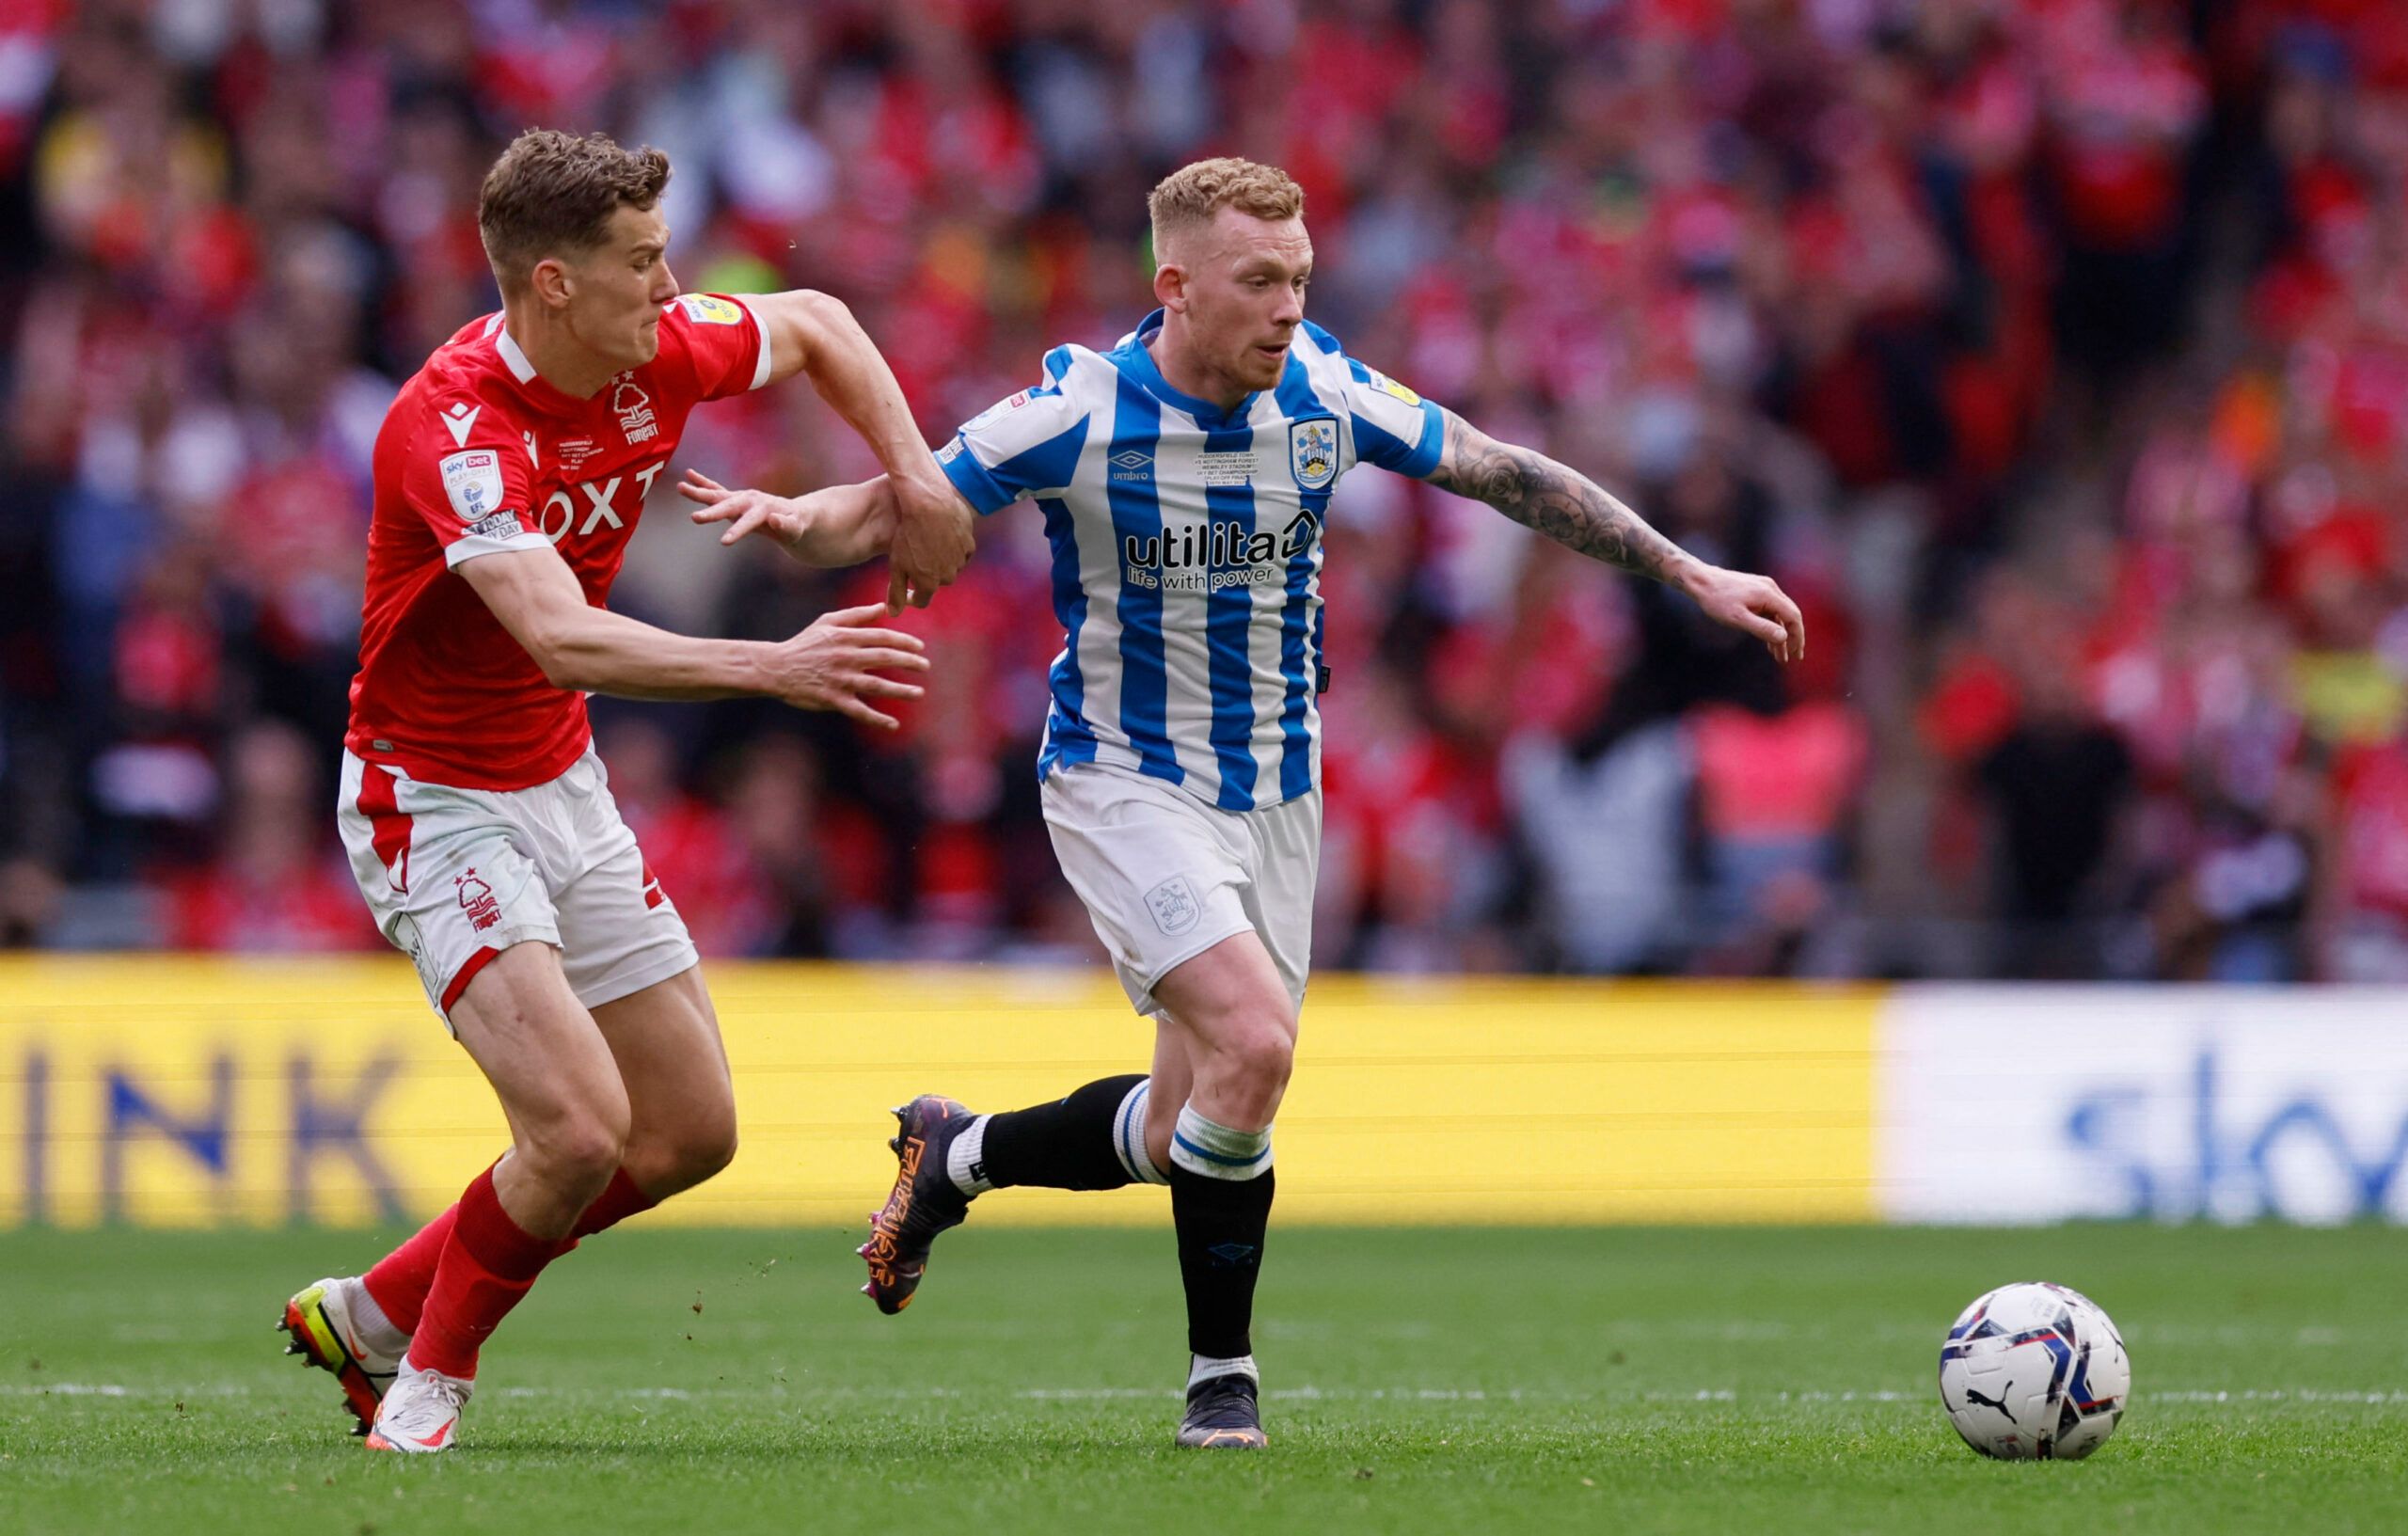 Soccer Football - Championship Play-Off Final - Huddersfield Town v Nottingham Forest - Wembley Stadium, London, Britain - May 29, 2022 Nottingham Forest's Ryan Yates in action with Huddersfield Town's Lewis O'Brien Action Images via Reuters/Andrew Couldridge